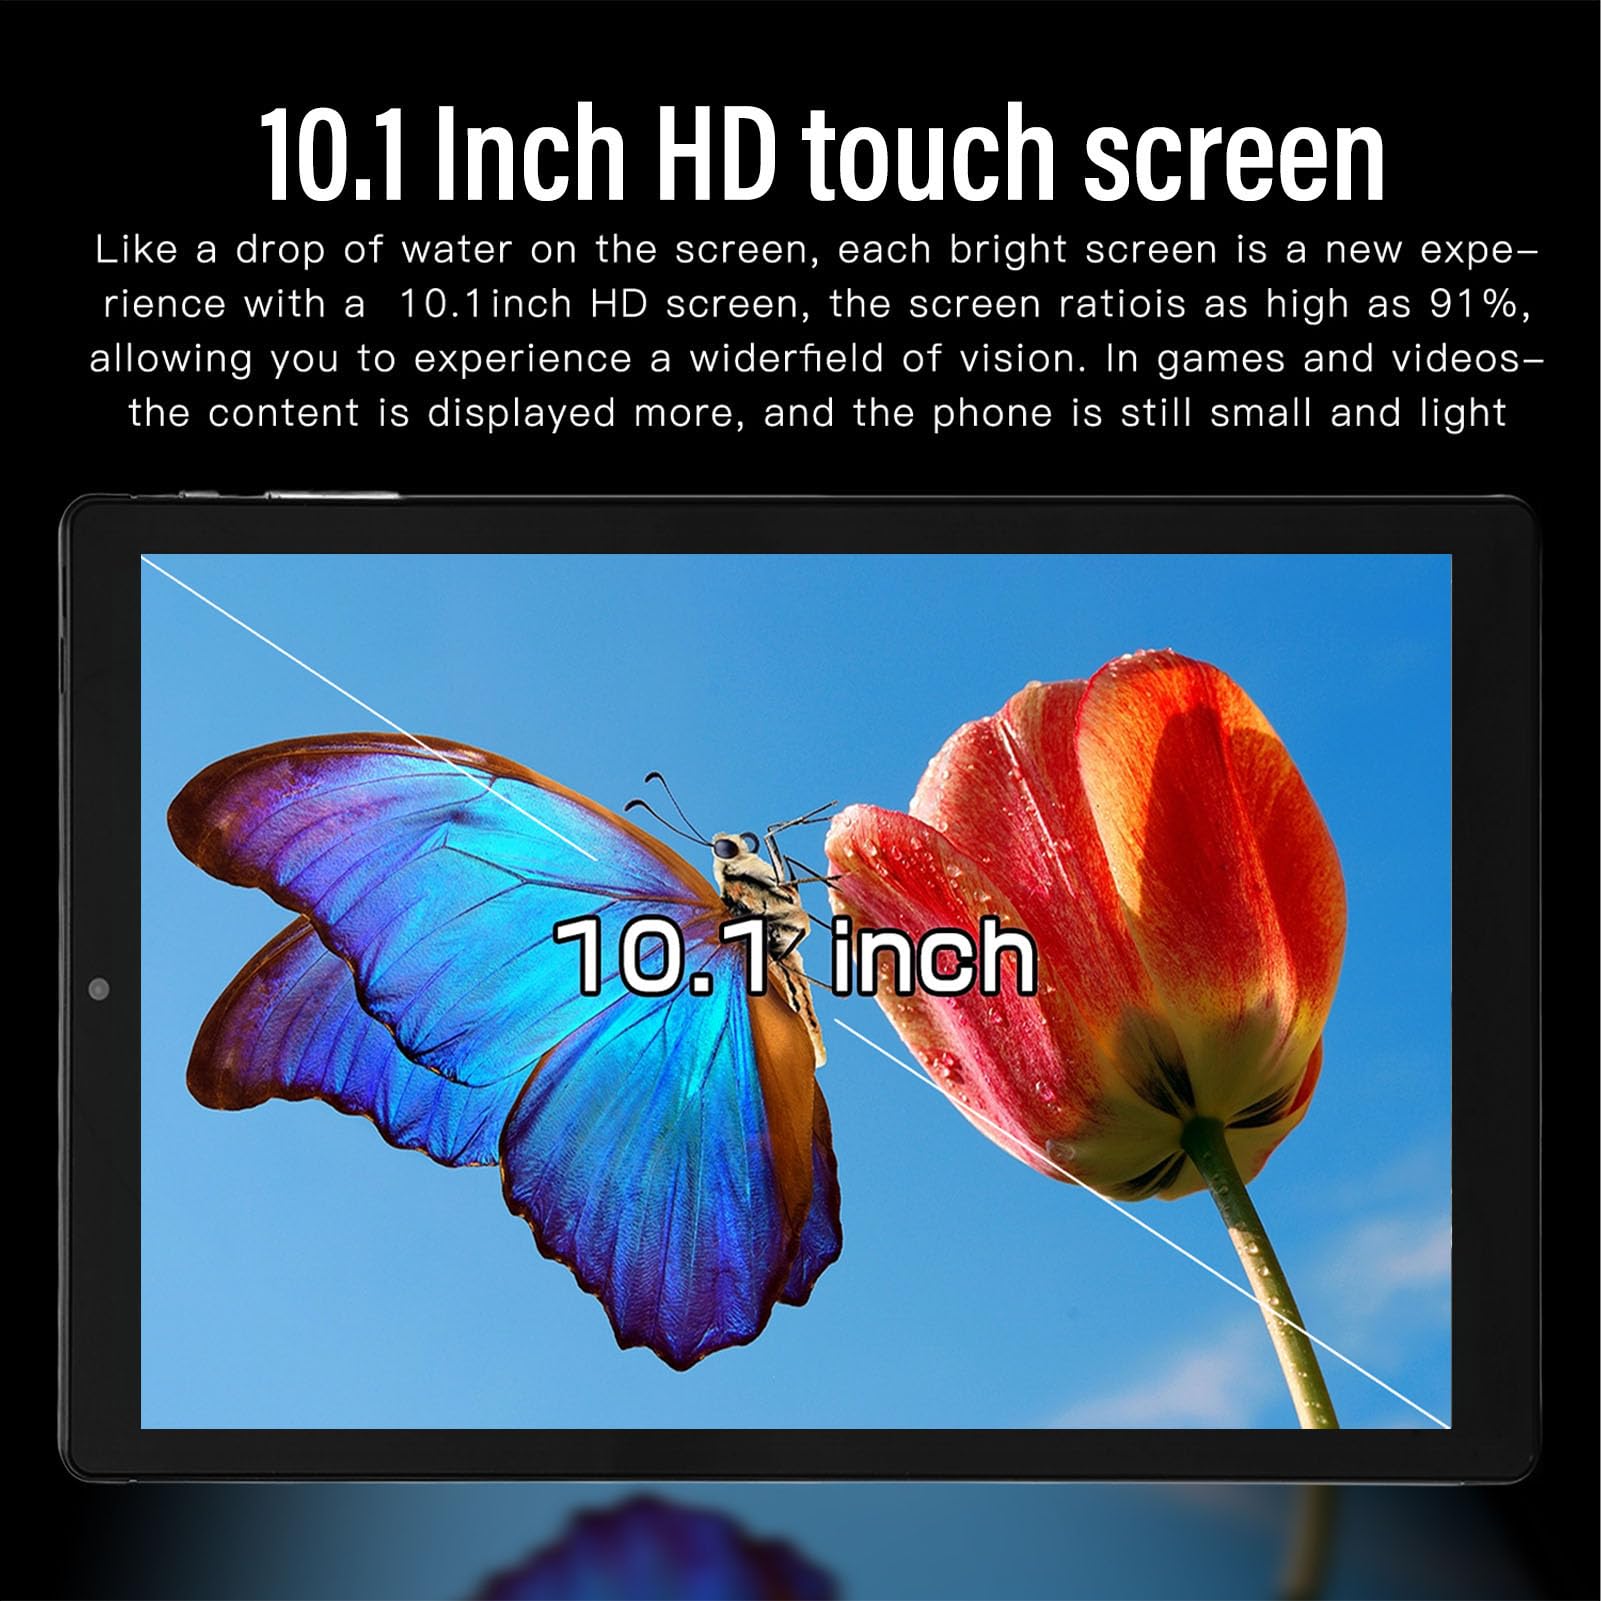 10.1 inch Tablet 6GB RAM 128GB ROM, Deca Core CPU, 5G WiFi, 2 in 1 Tablet PC withKeyboard,12.0, High Resolution Incell Display, Dual Speakers, Long Battery Life (Blue)